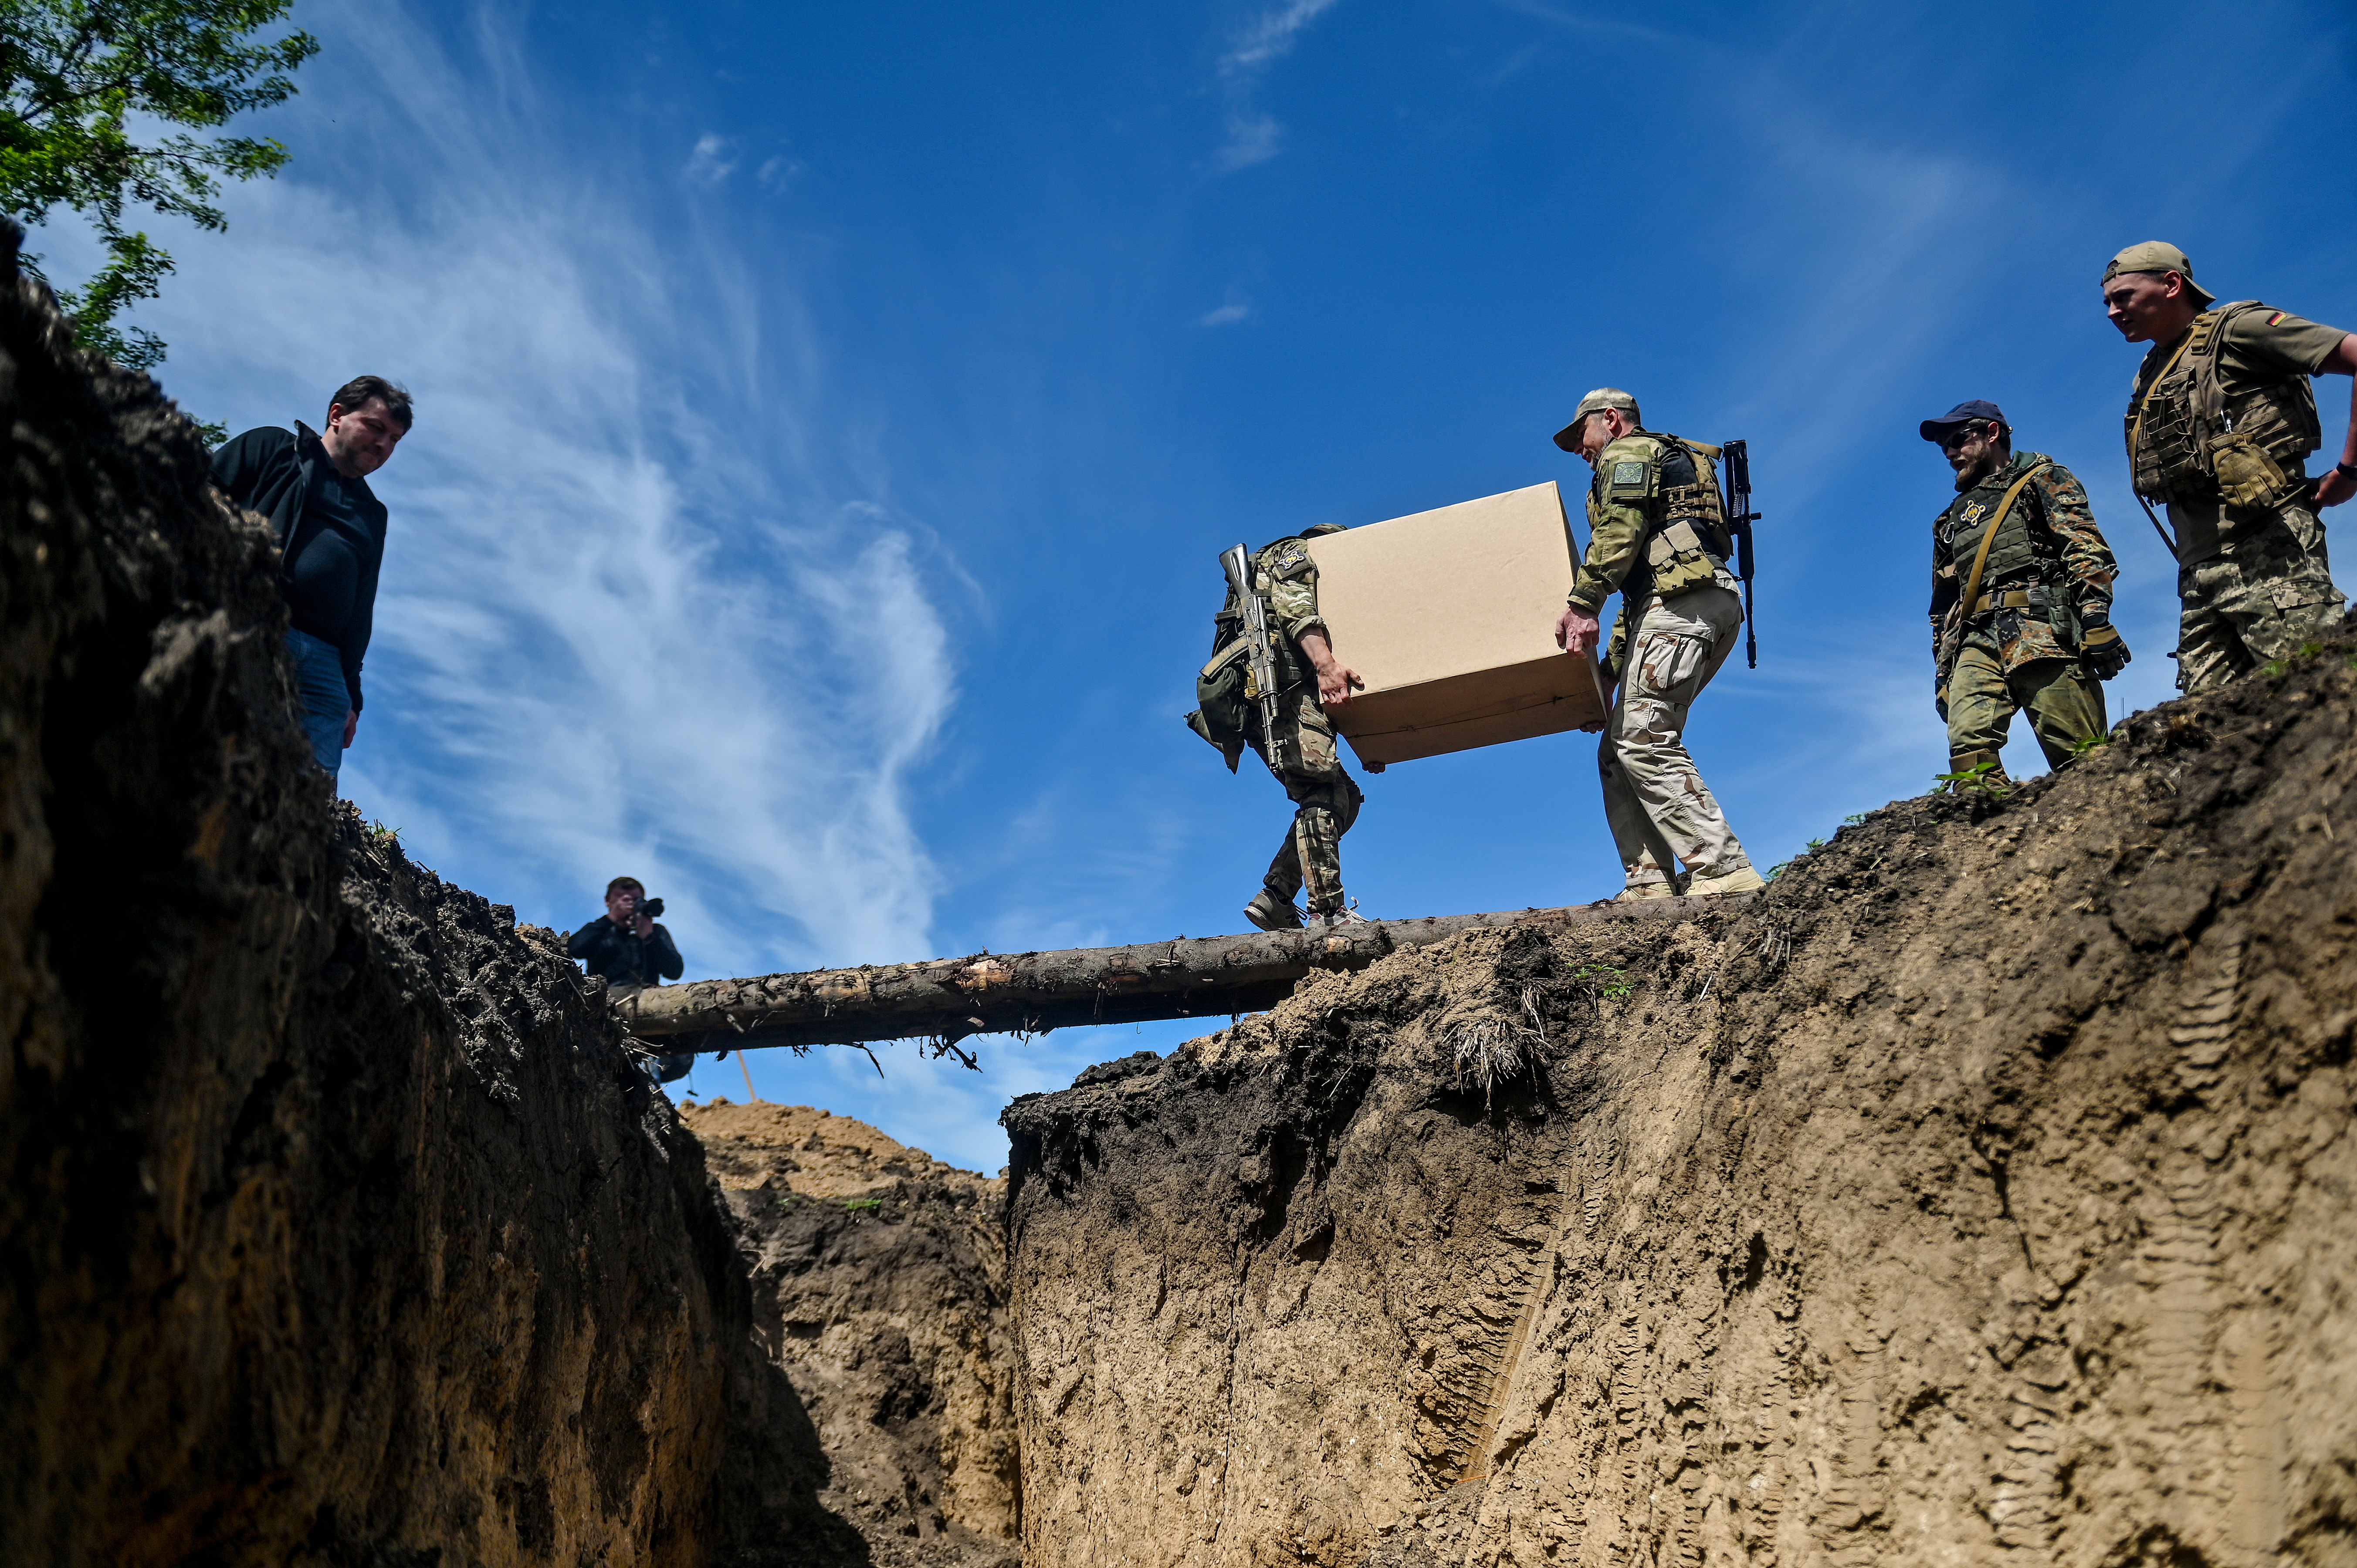 Under a bright blue sky, two soldiers in green and tan camouflage carry a tan box across a short bridge made out of logs that spans a trench. Other members of their squad look on.